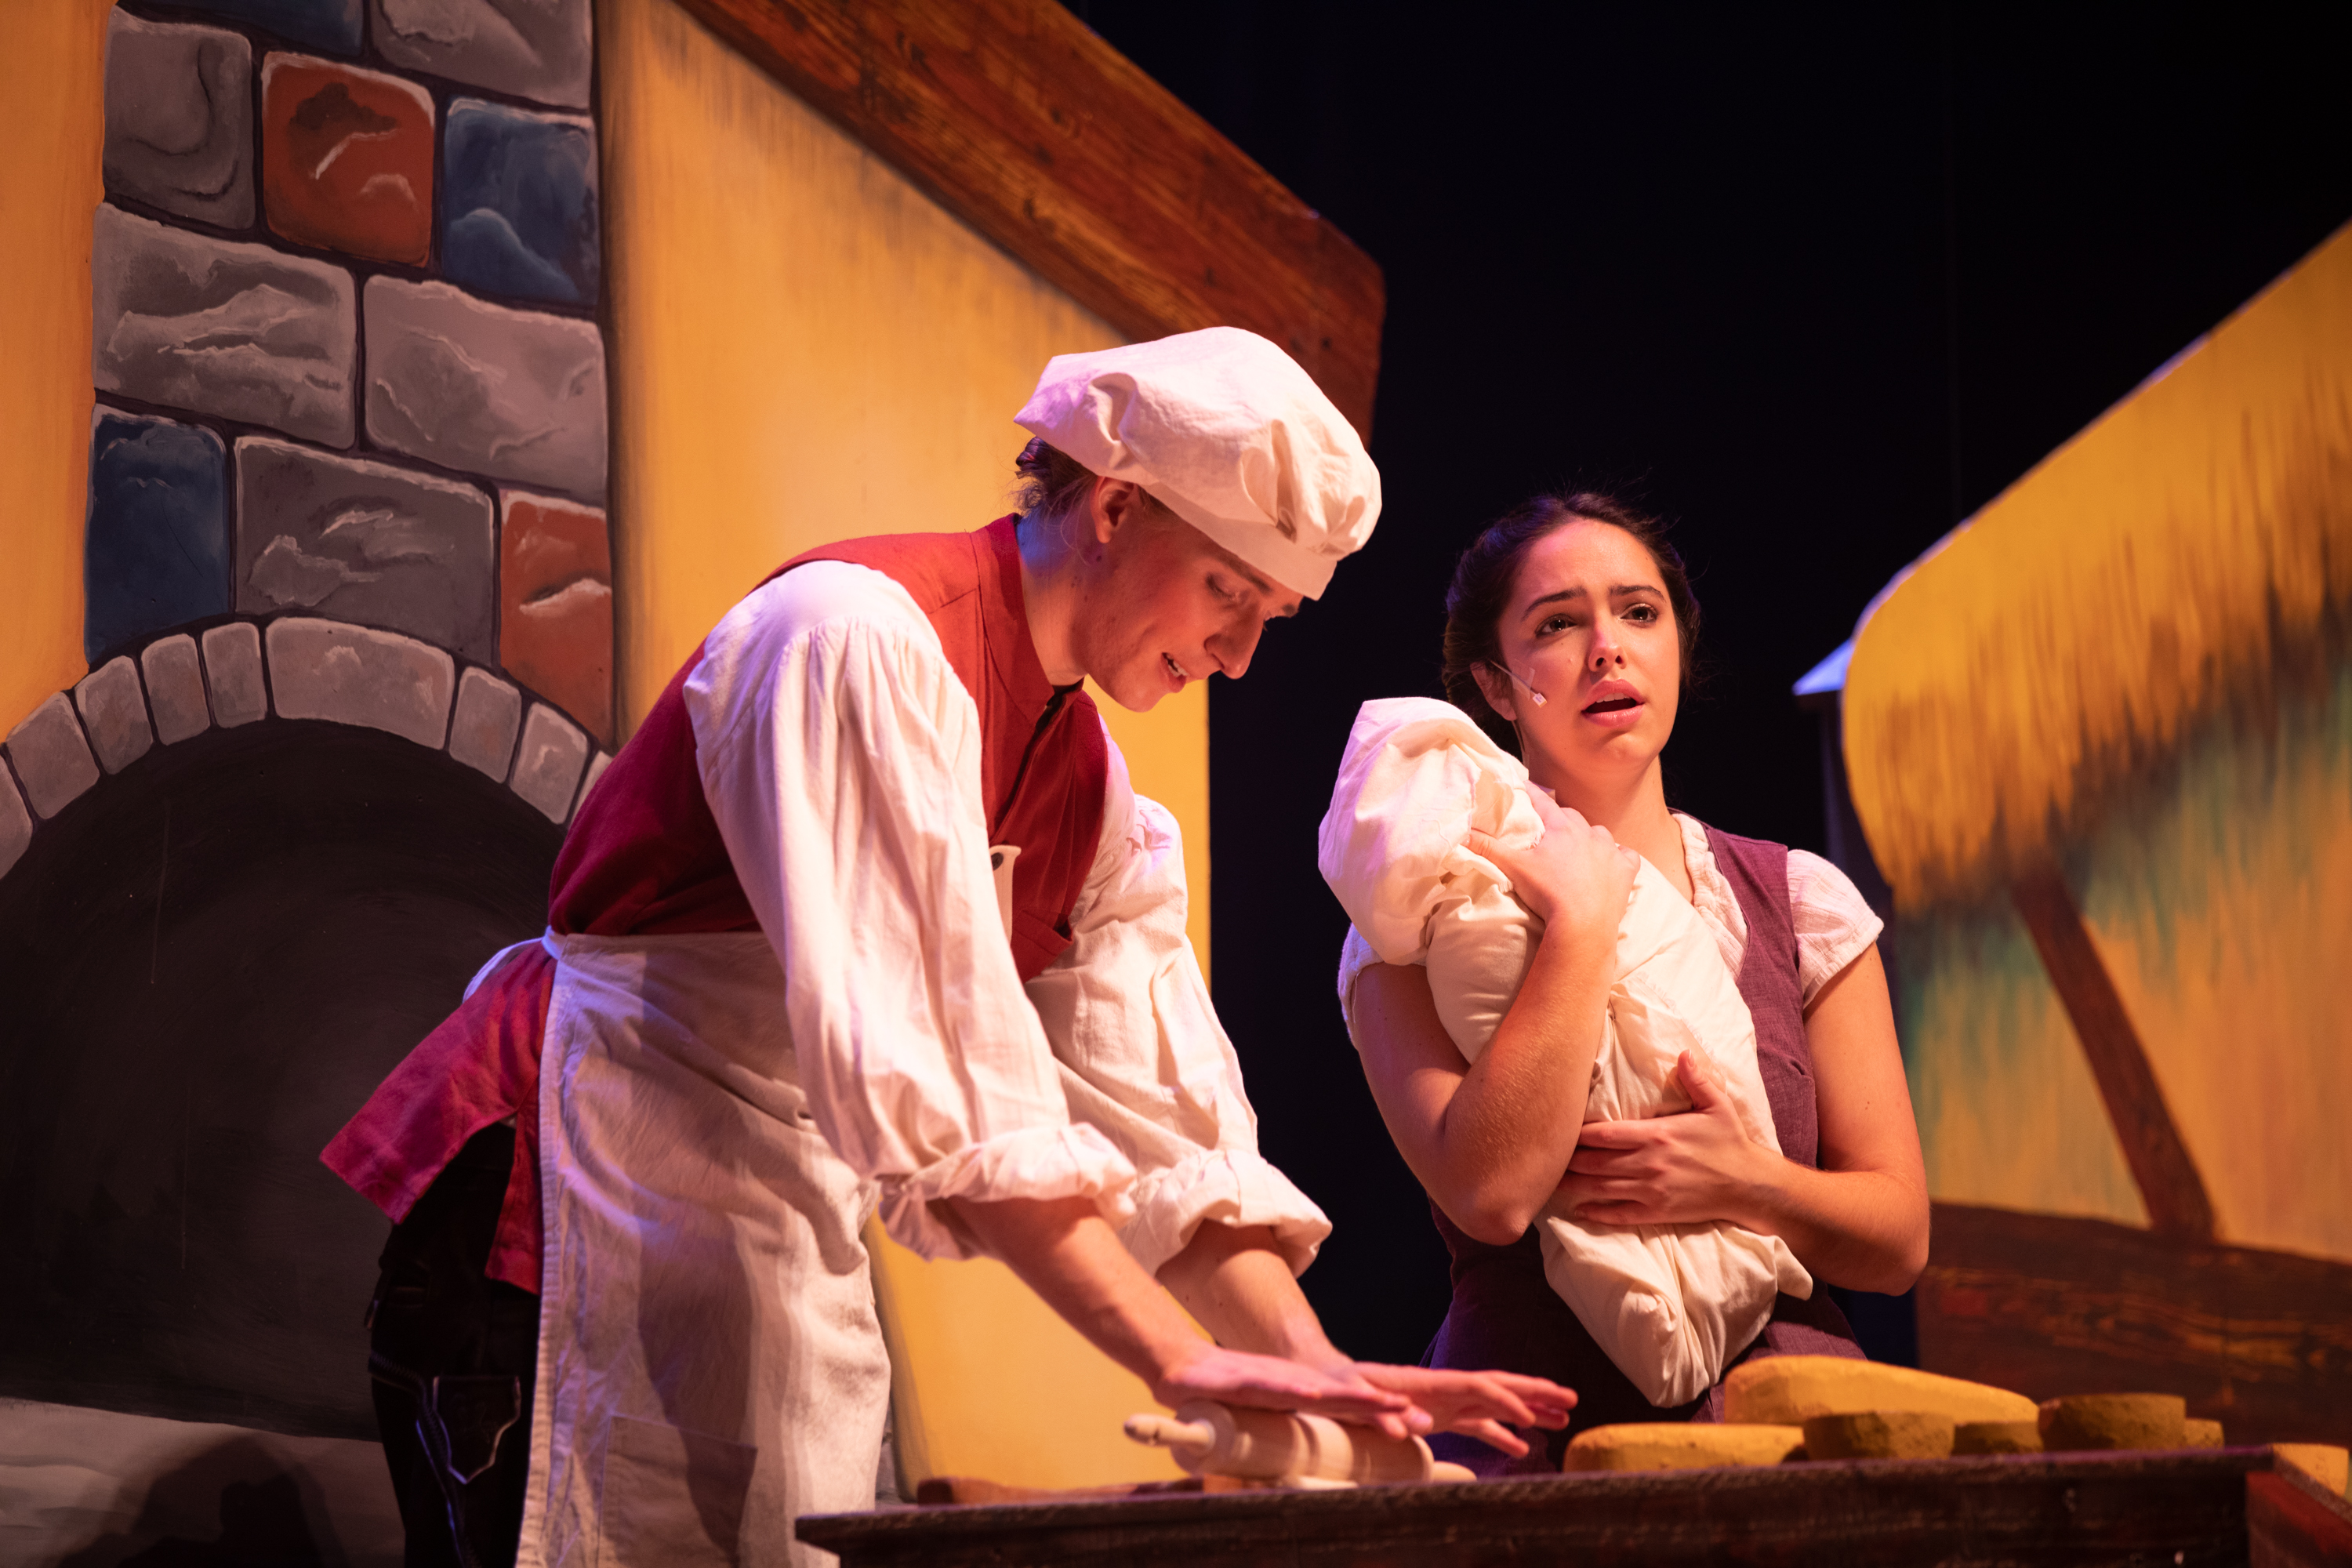 The Baker (Zach de Besche), the Baker's Wife (Allie Charney), and their child at the beginning of Act II (Photo courtesy of Gettysburg College/Abbey Frisco)